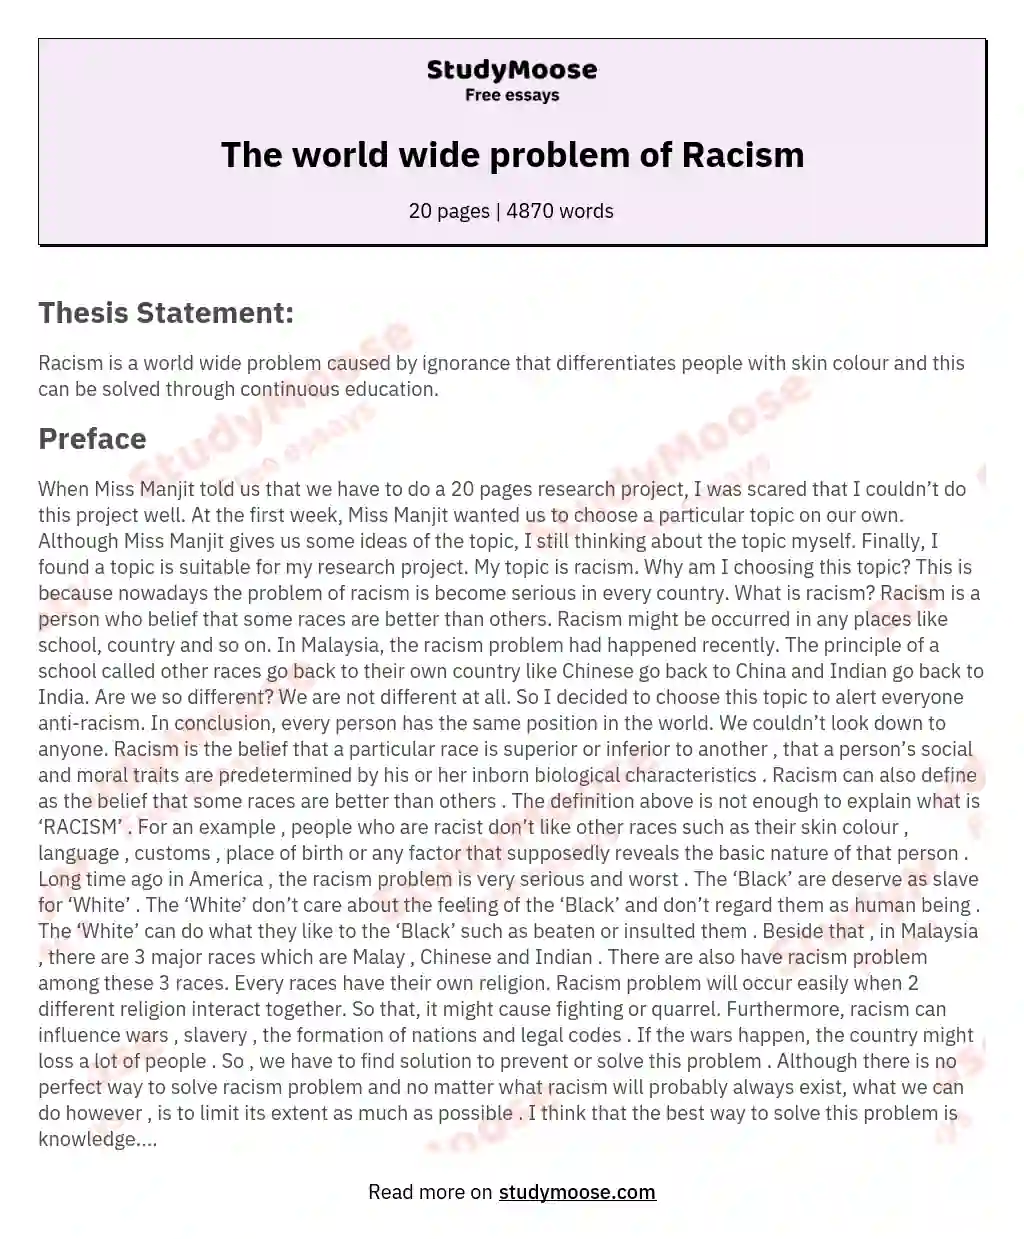 The world wide problem of Racism essay